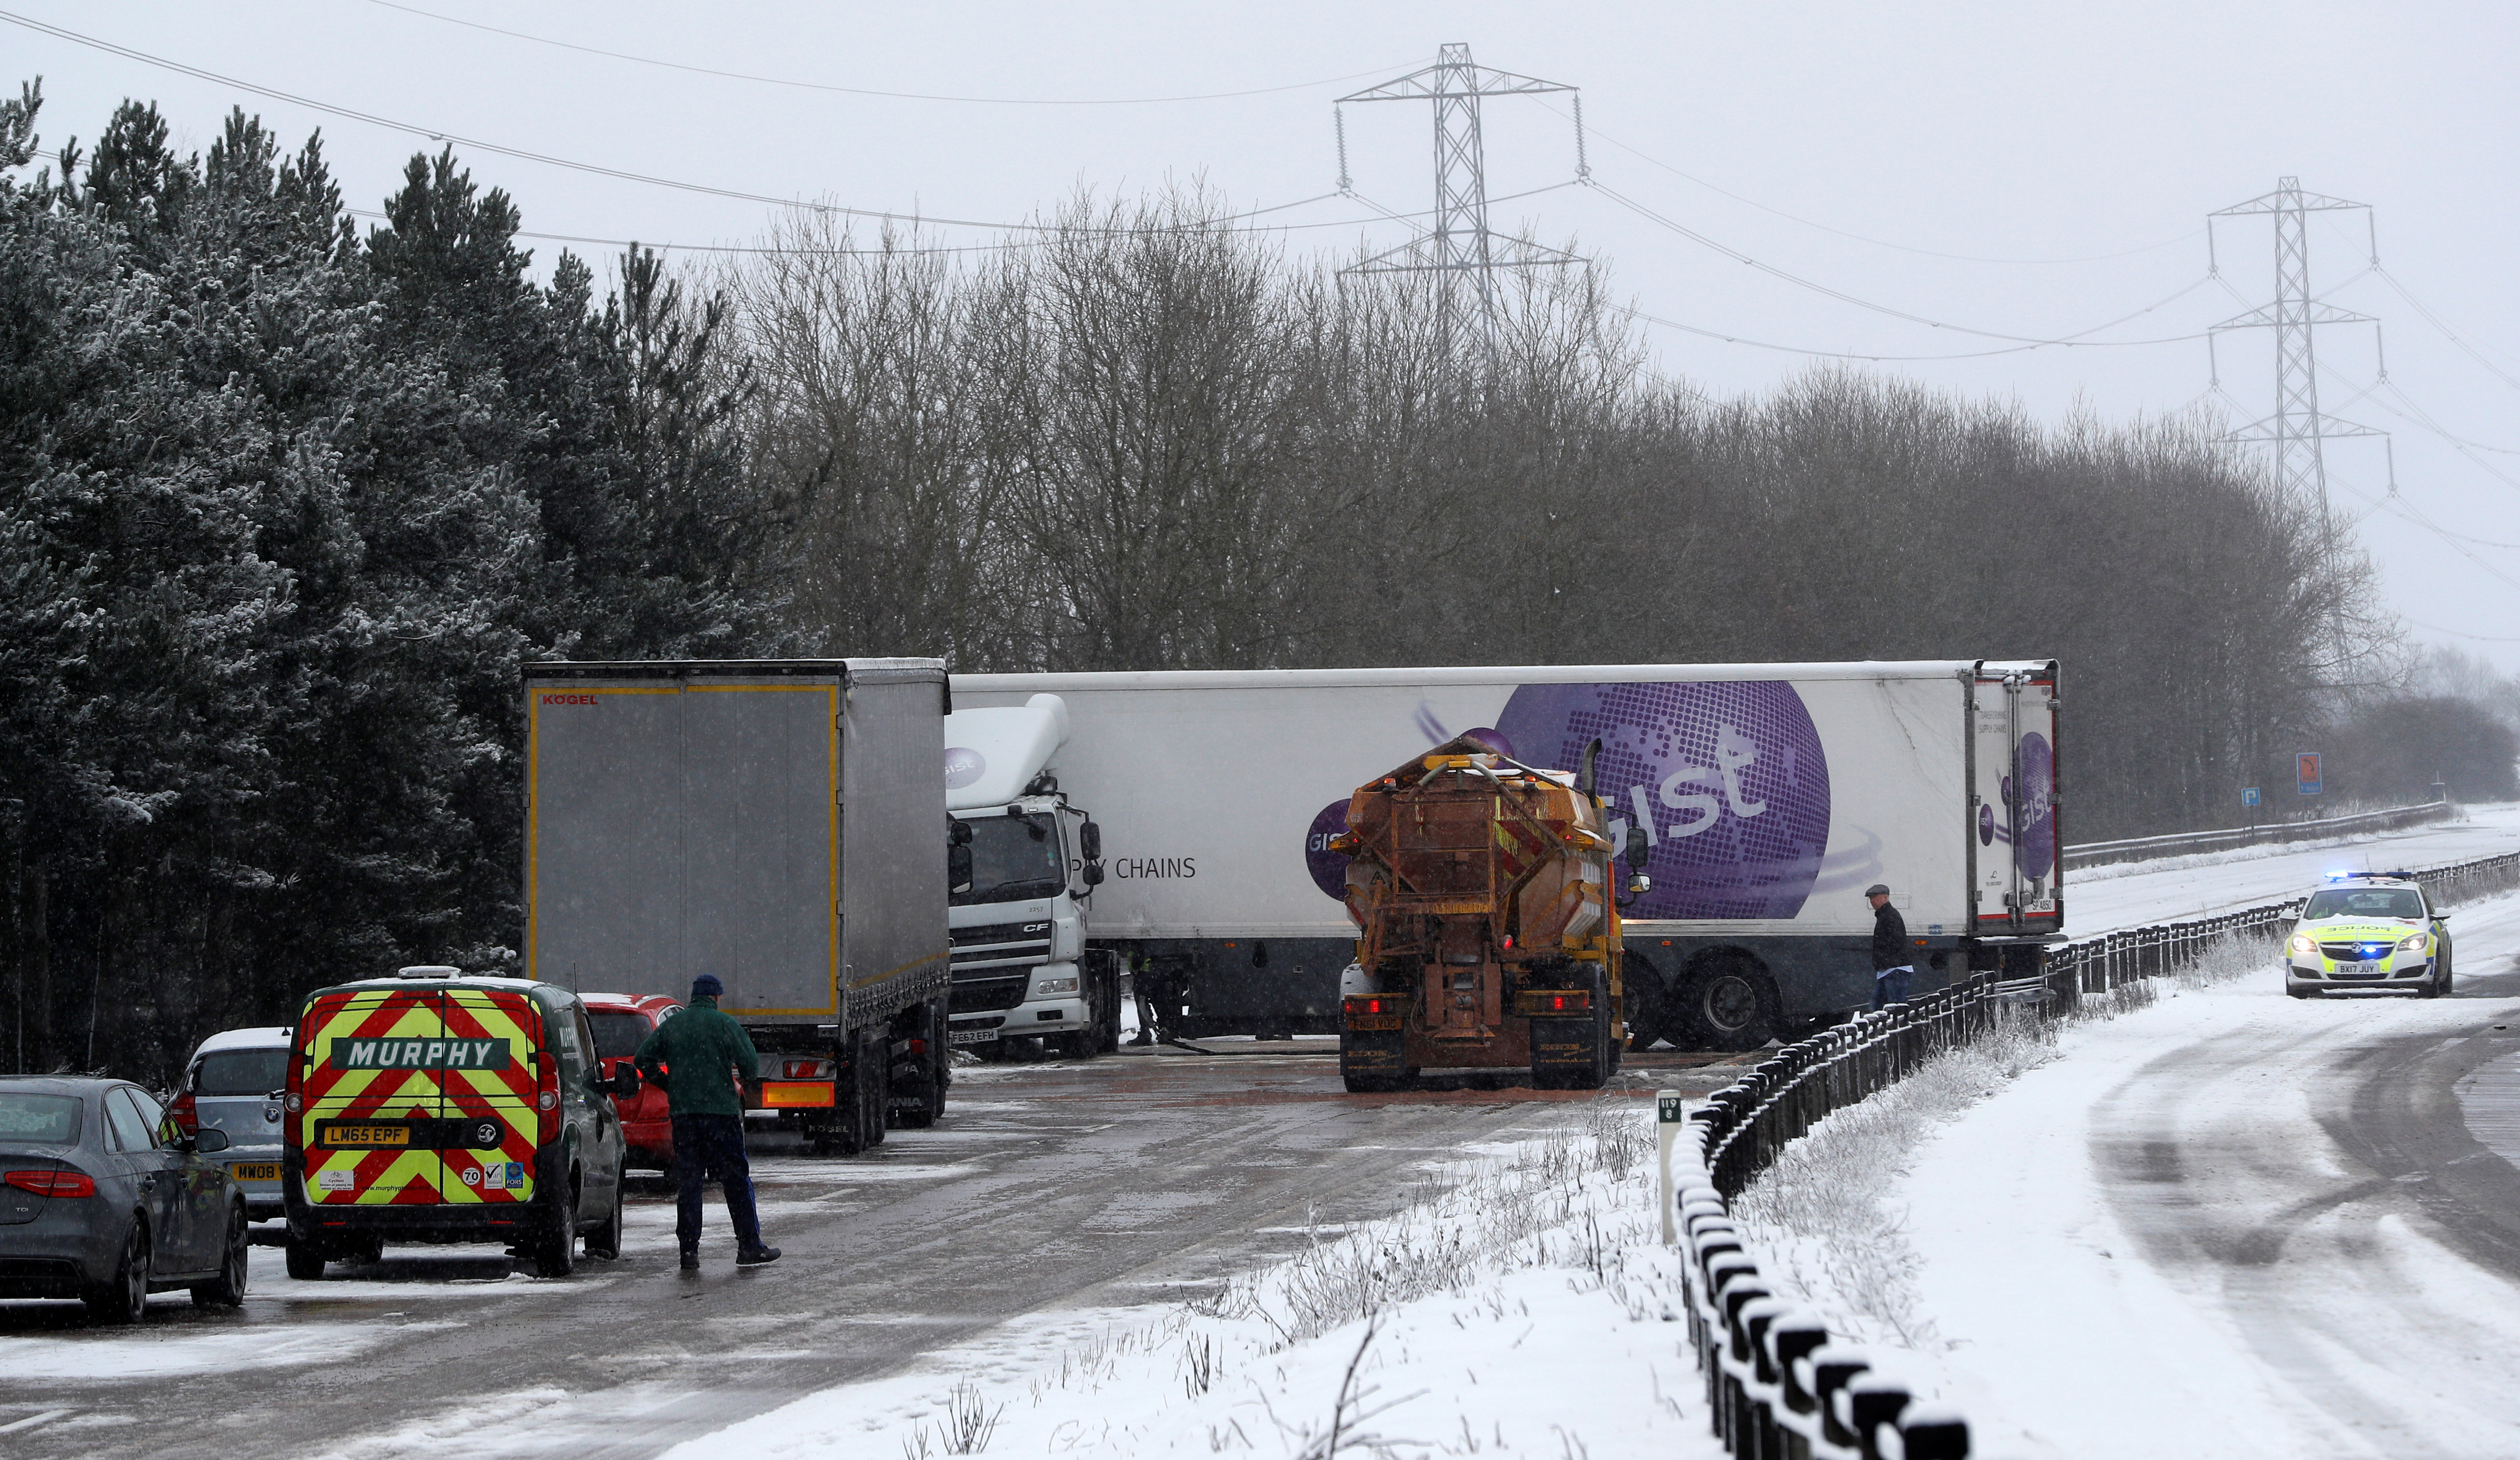 <strong>A lorry crashed on the busy A50 amid snow near Uttoxeter, Staffordshire, on Sunday</strong>